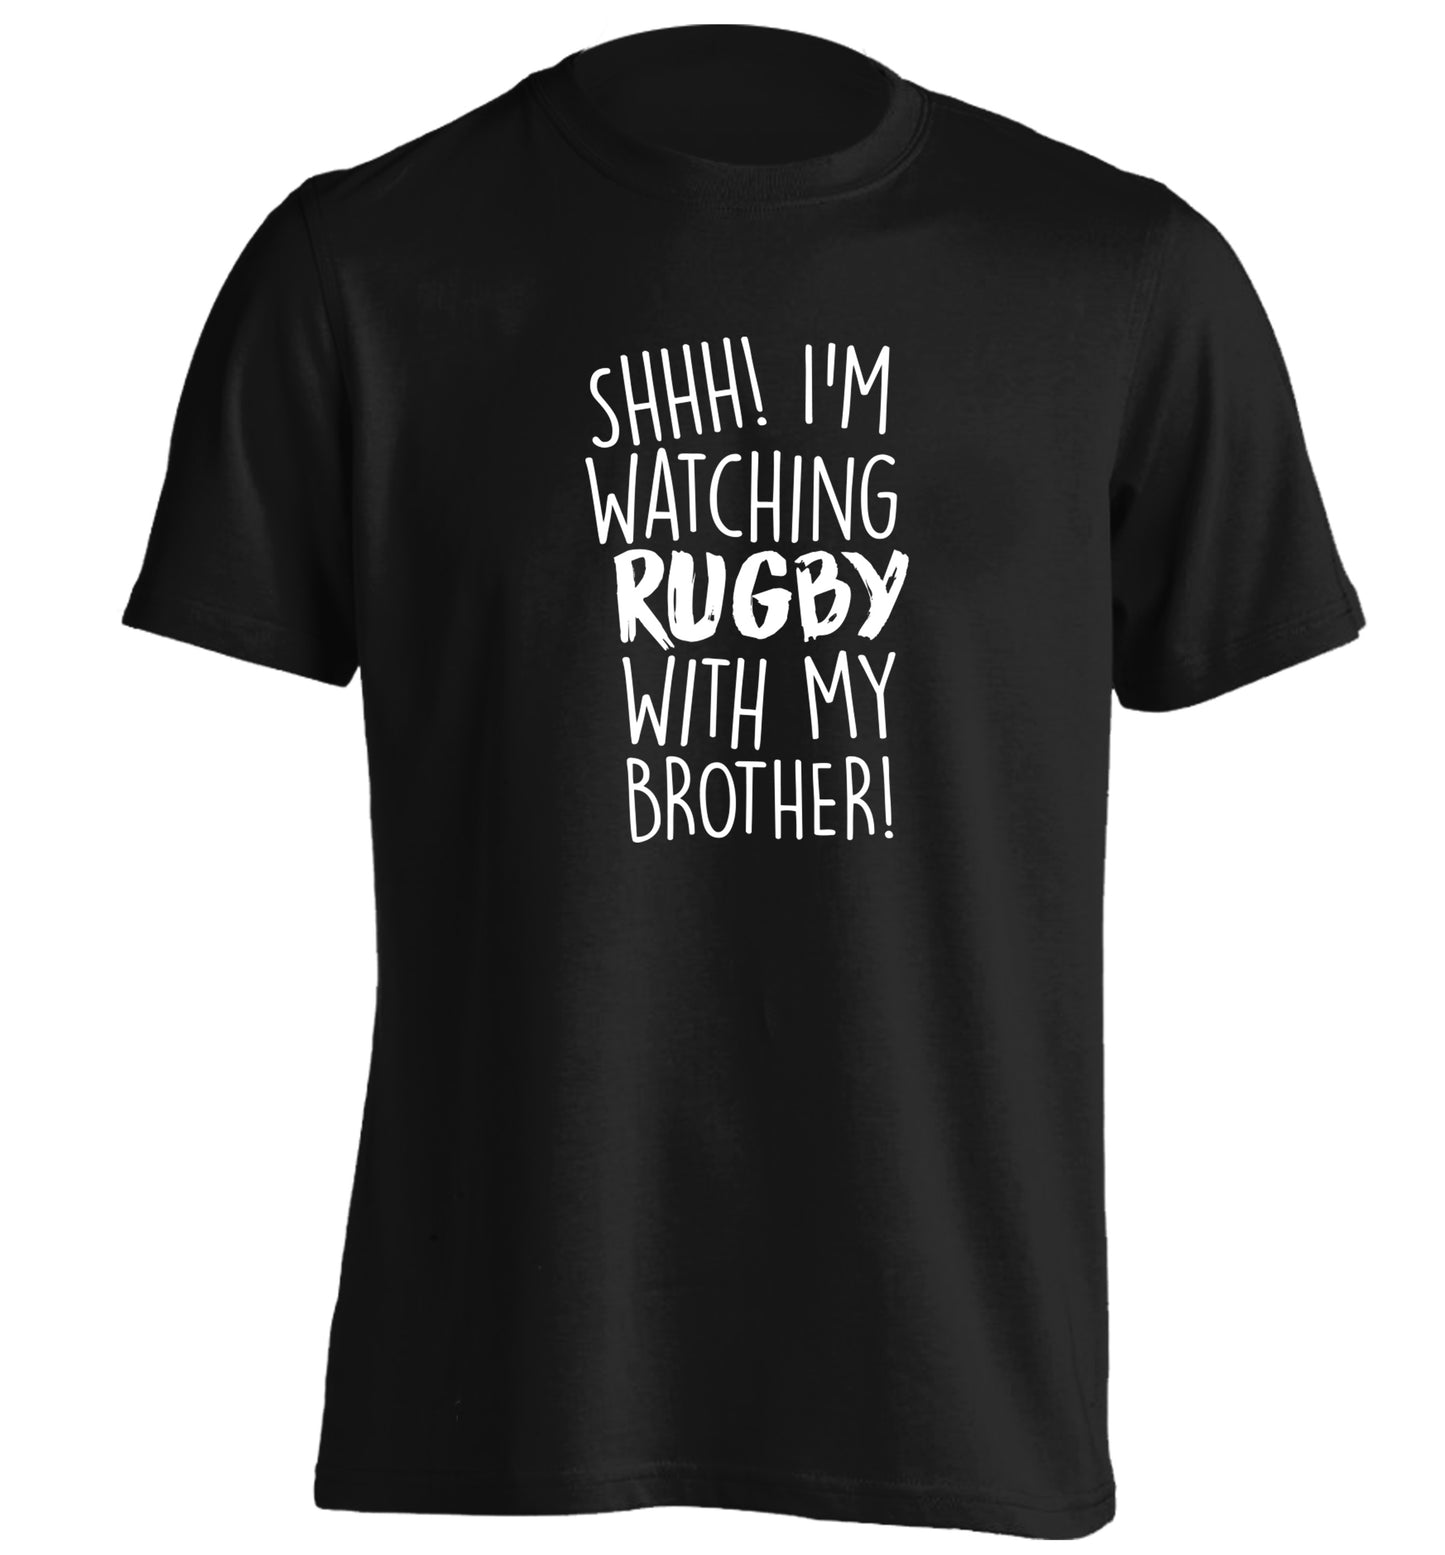 Shh... I'm watching rugby with my brother adults unisex black Tshirt 2XL